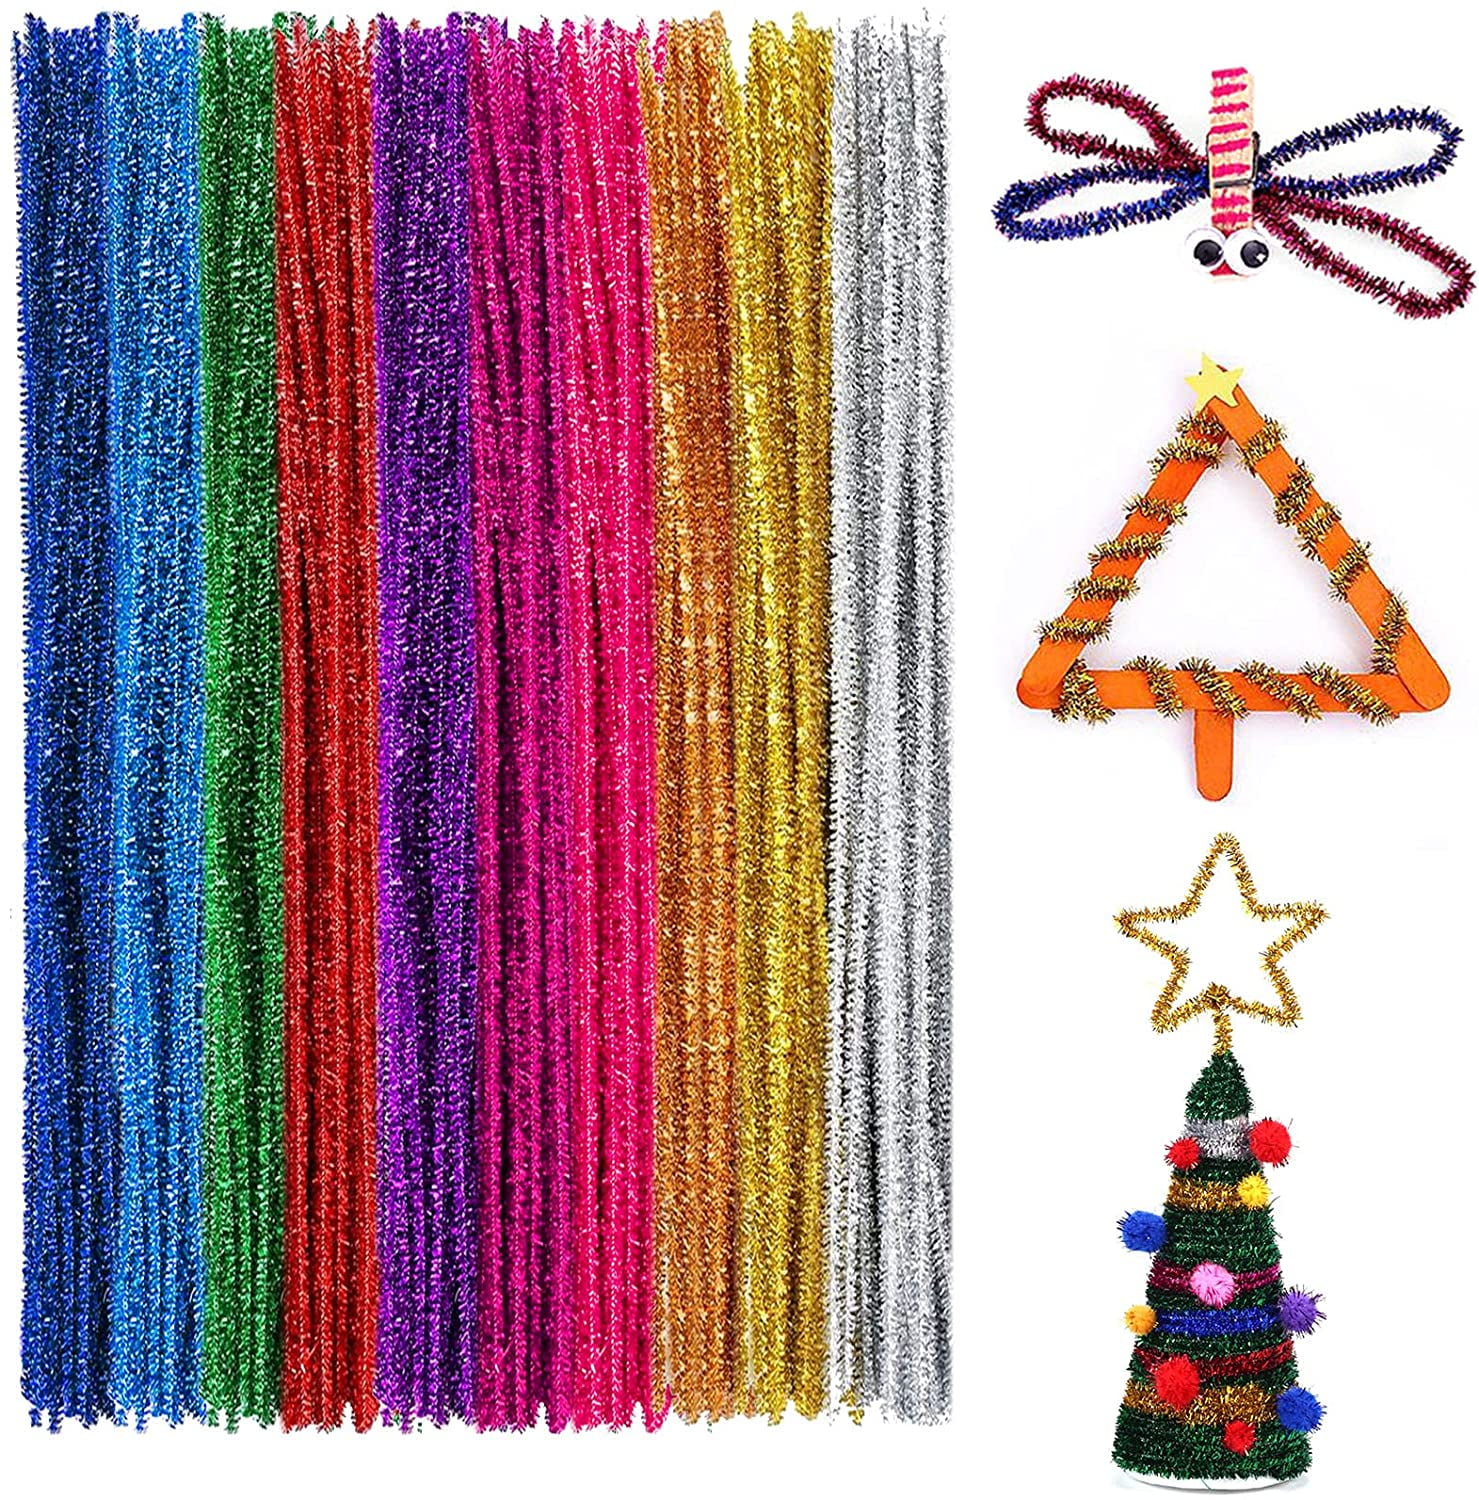 Pipe Cleaners 100 Pcs Chenille Stems Solid Color Set For Pipe Cleaners Fun Diy Arts Crafts Decorations Creative Crafts 